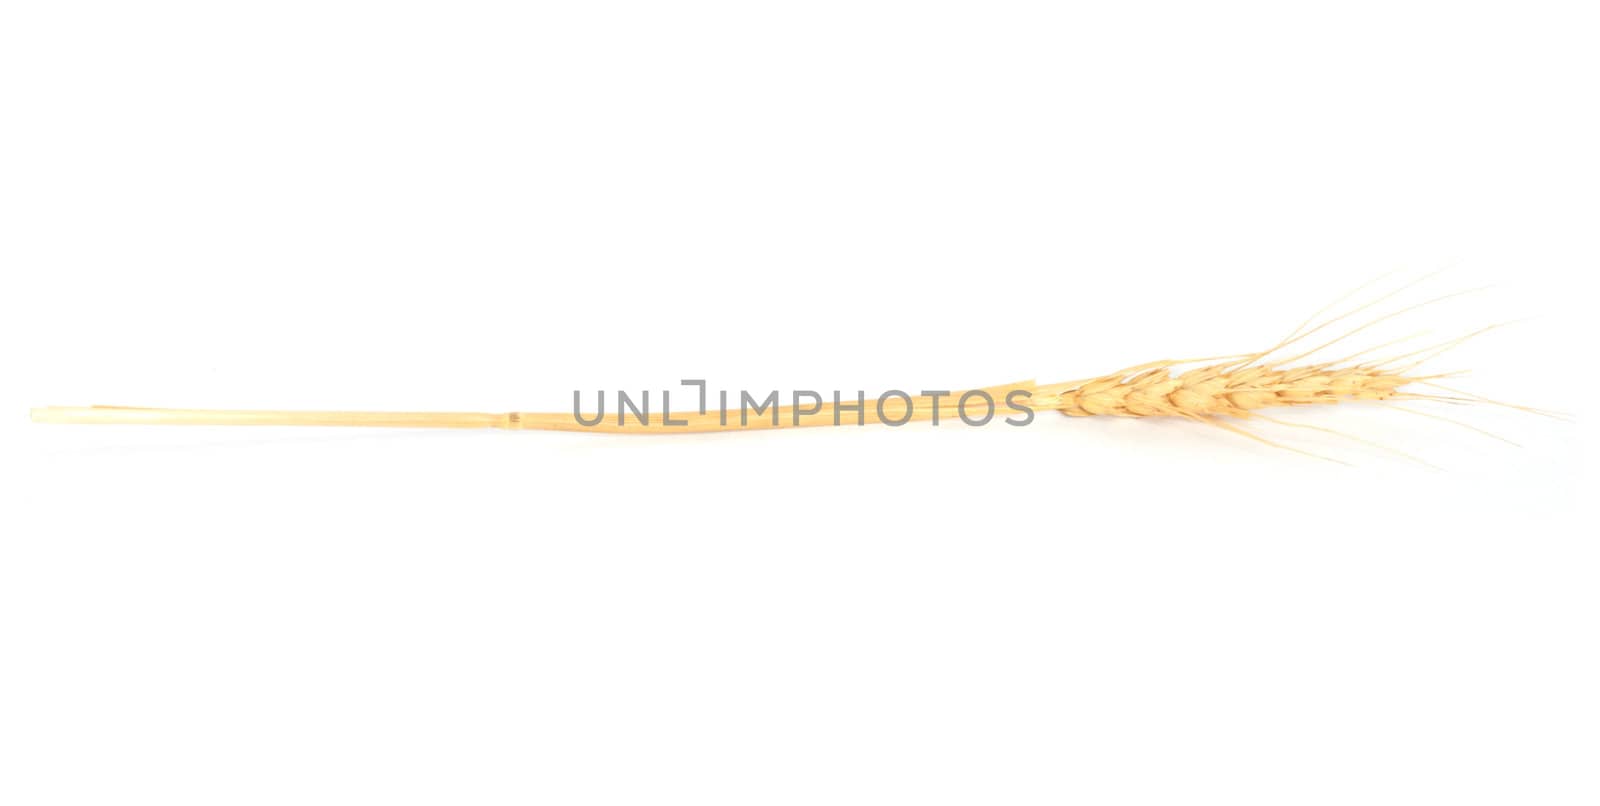 Dried Ear of Cereal crop in studio isolated against white background. 